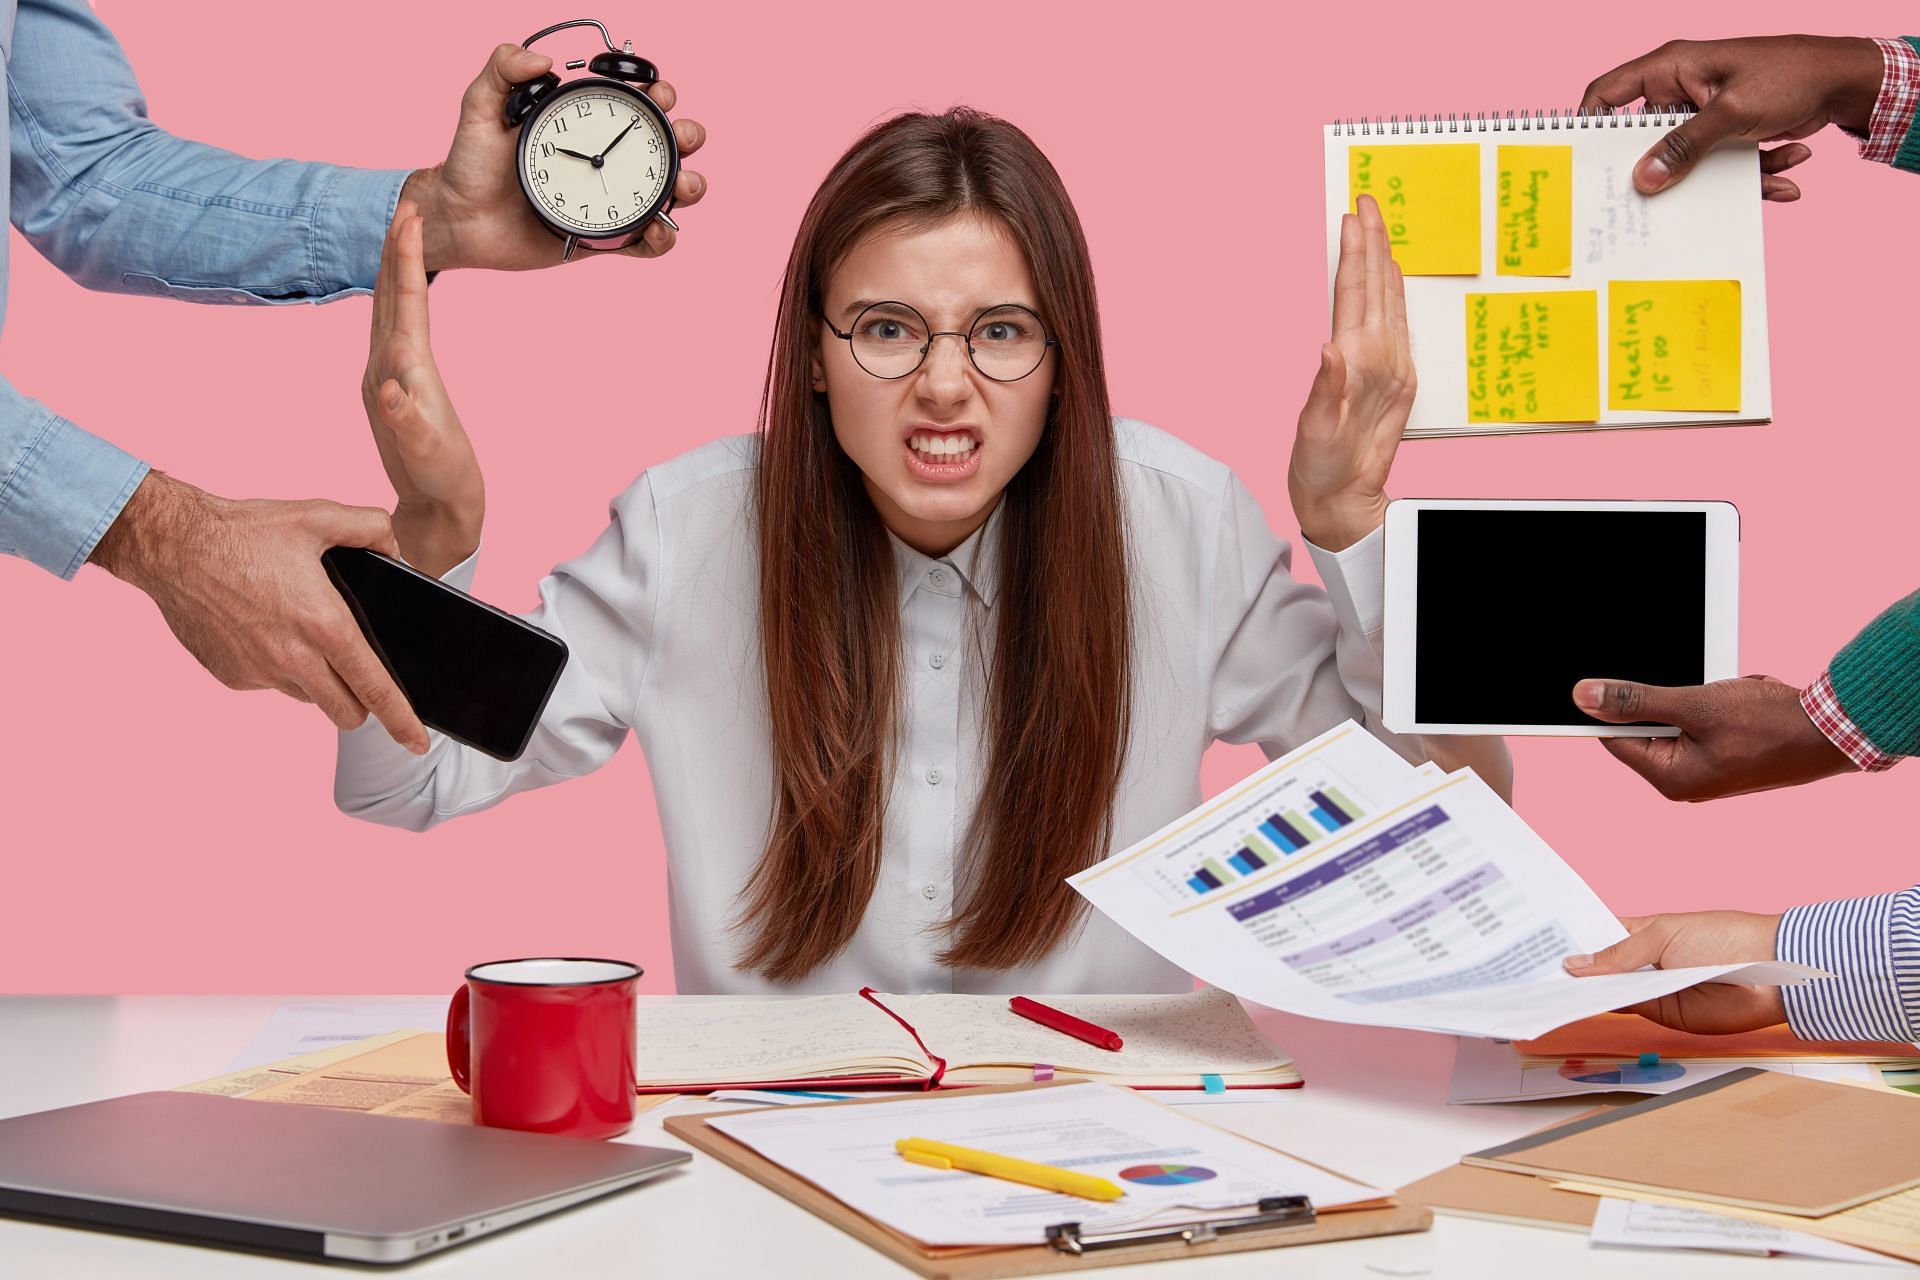 Can stress kill you? Yes, if  it becomes excessive. (Image via Freepik/Wayhomestudio)